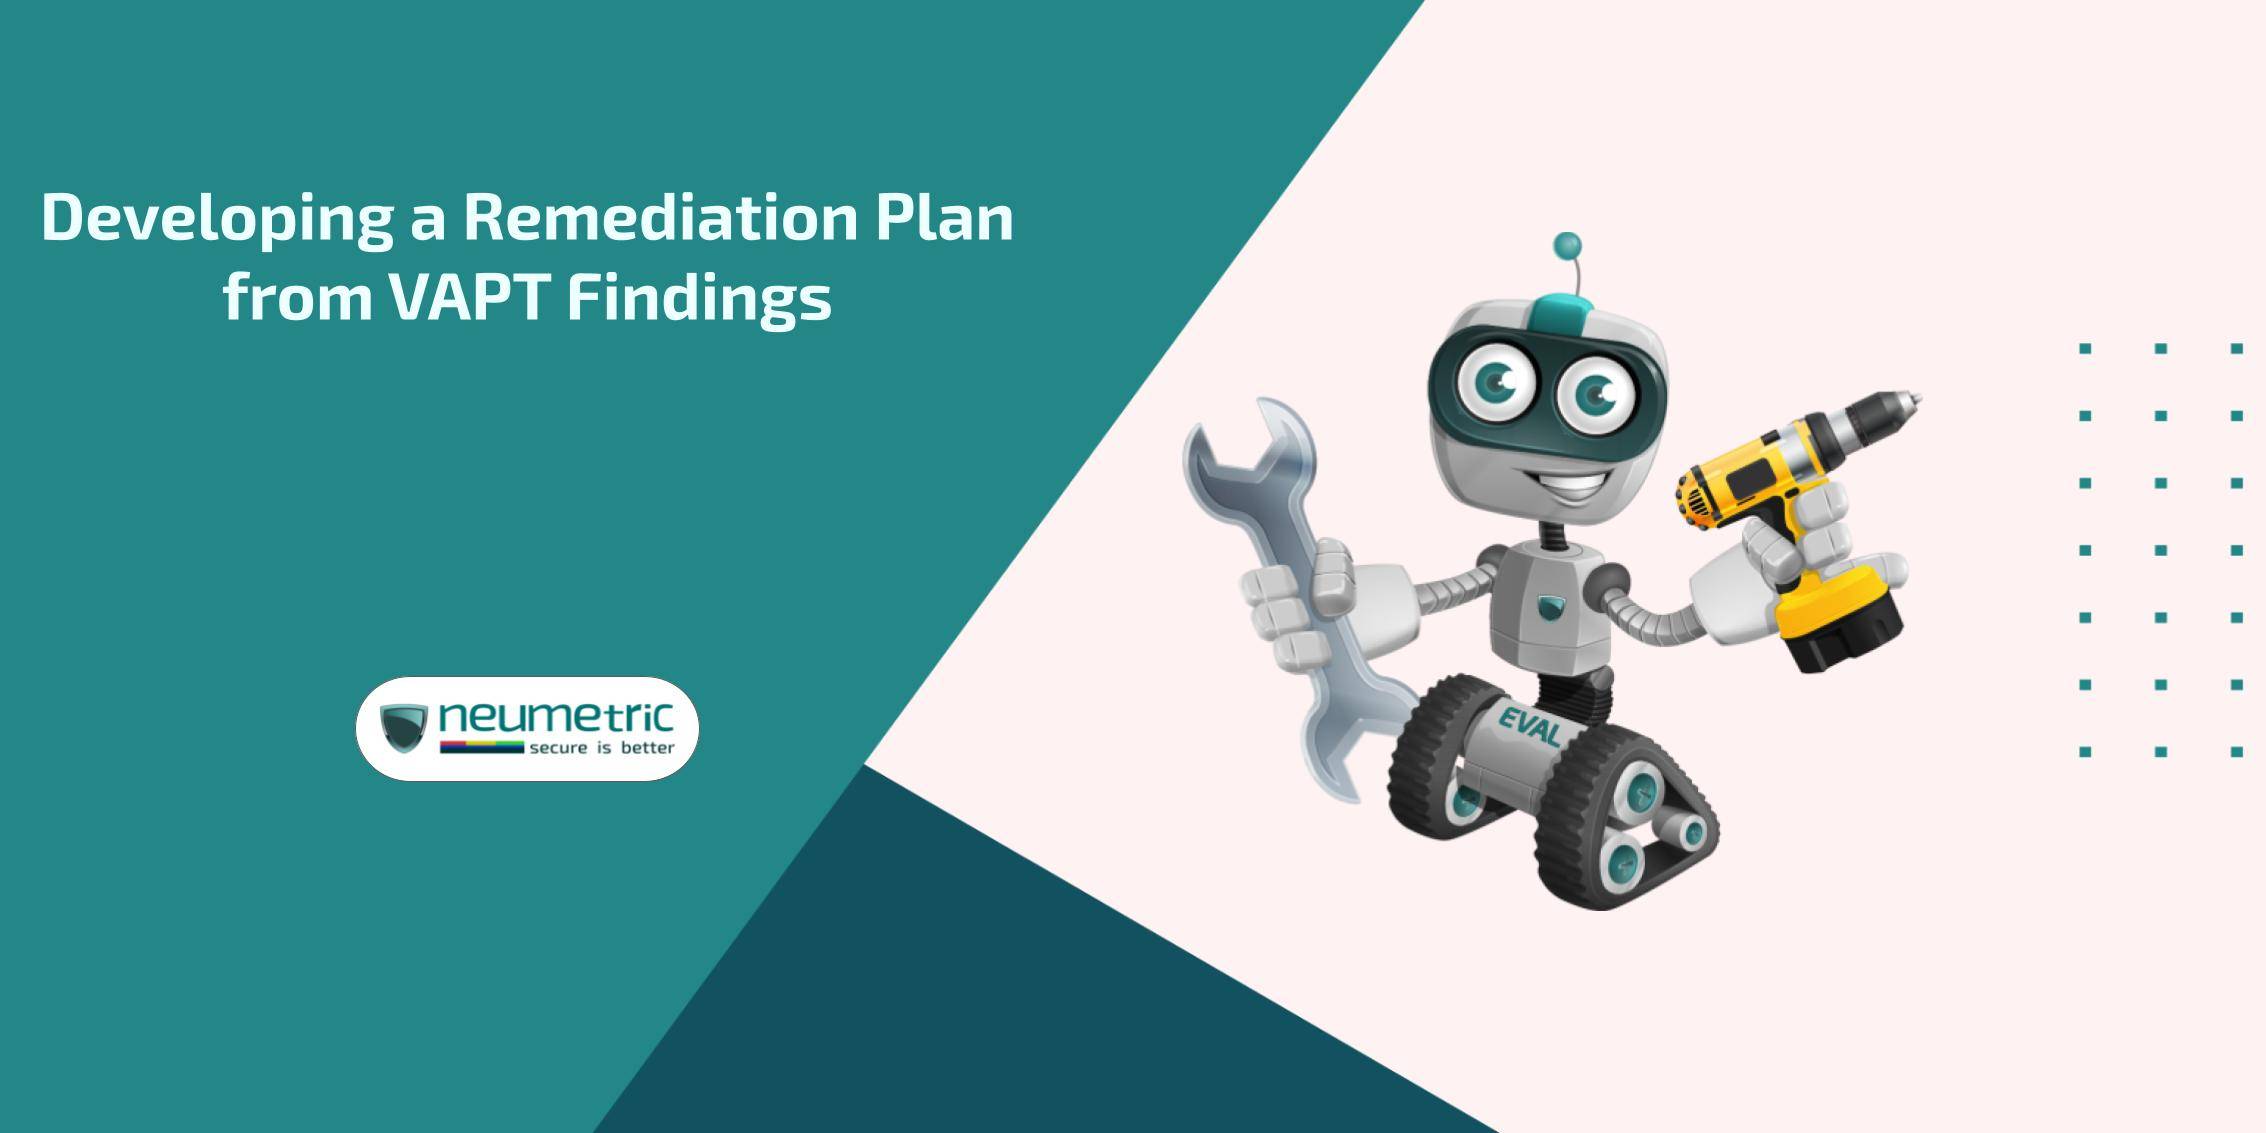 Developing a remediation plan from VAPT findings